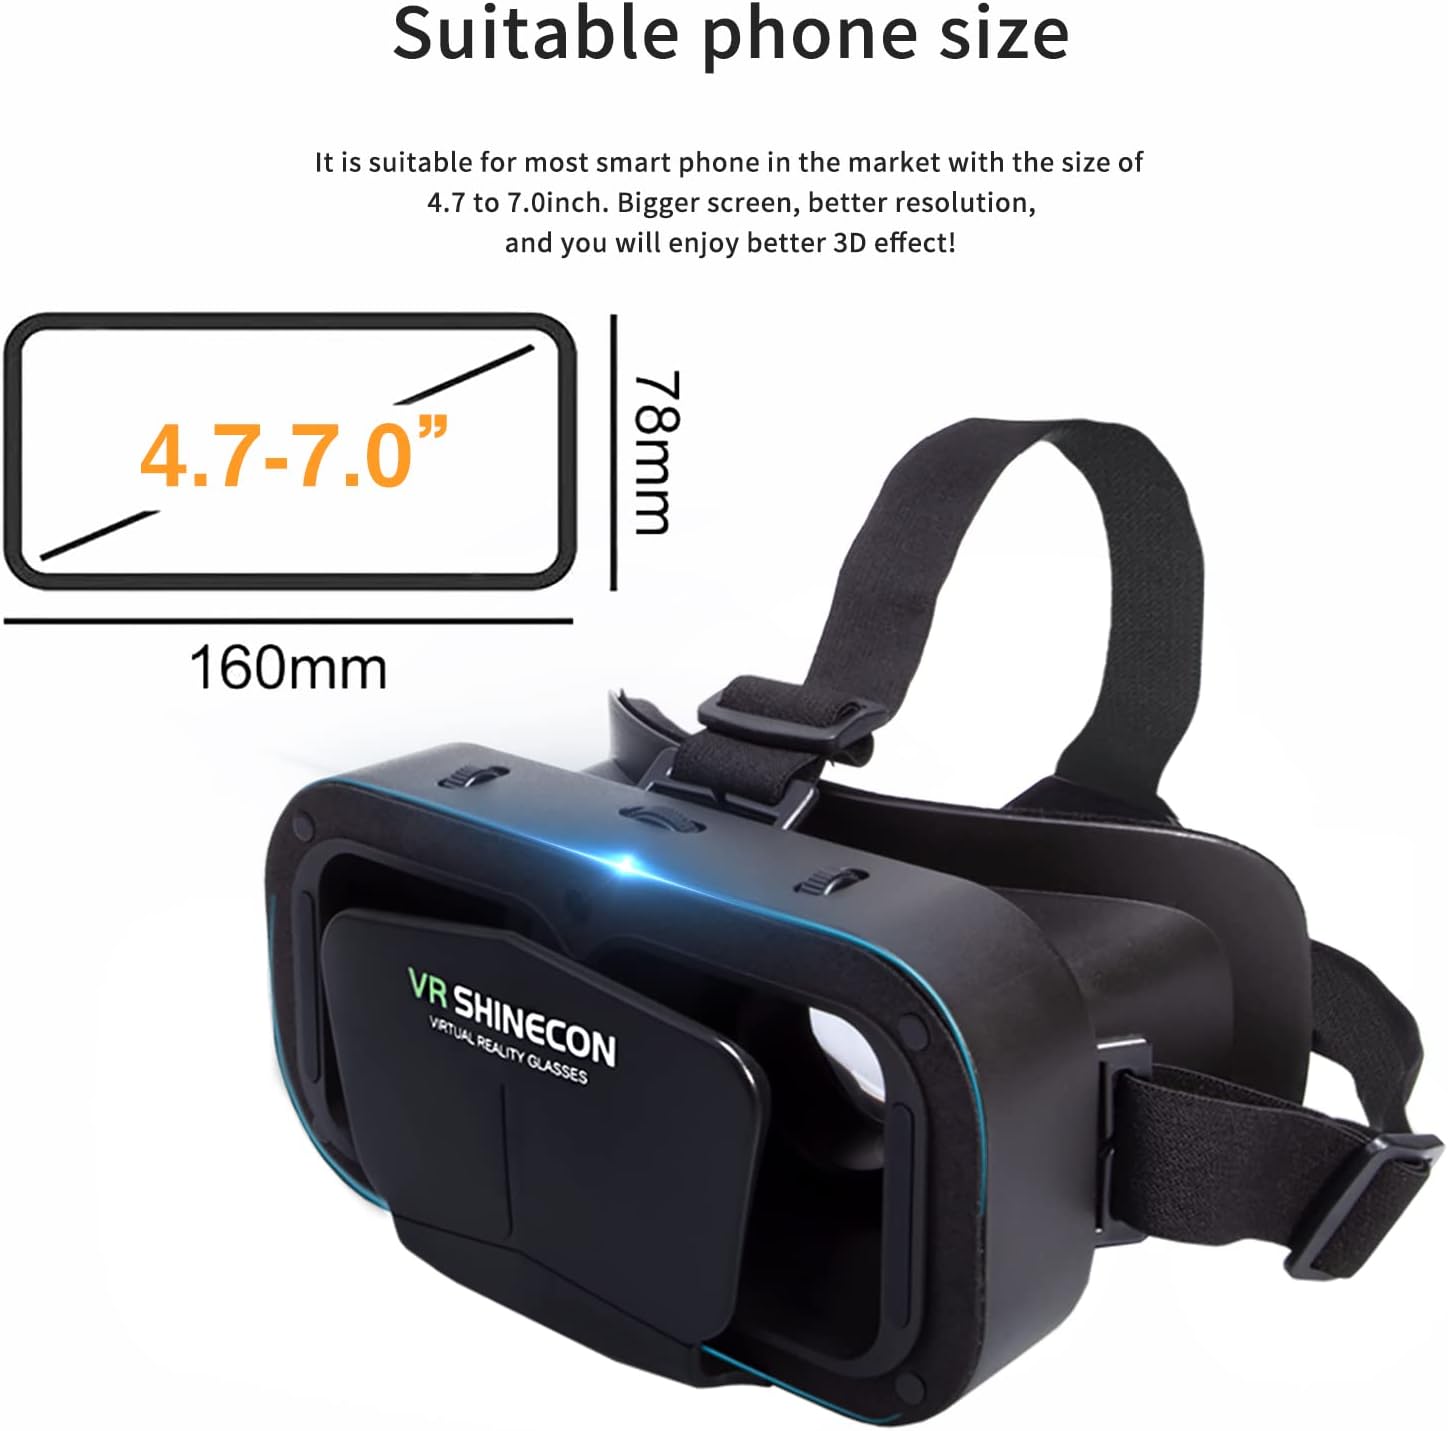 VR SHINECON Virtual Reality VR Headset 3D Glasses Headset Helmets VR Goggles for TV, Movies Video Games Compatible iOS, Android Support 4.7-7 inch